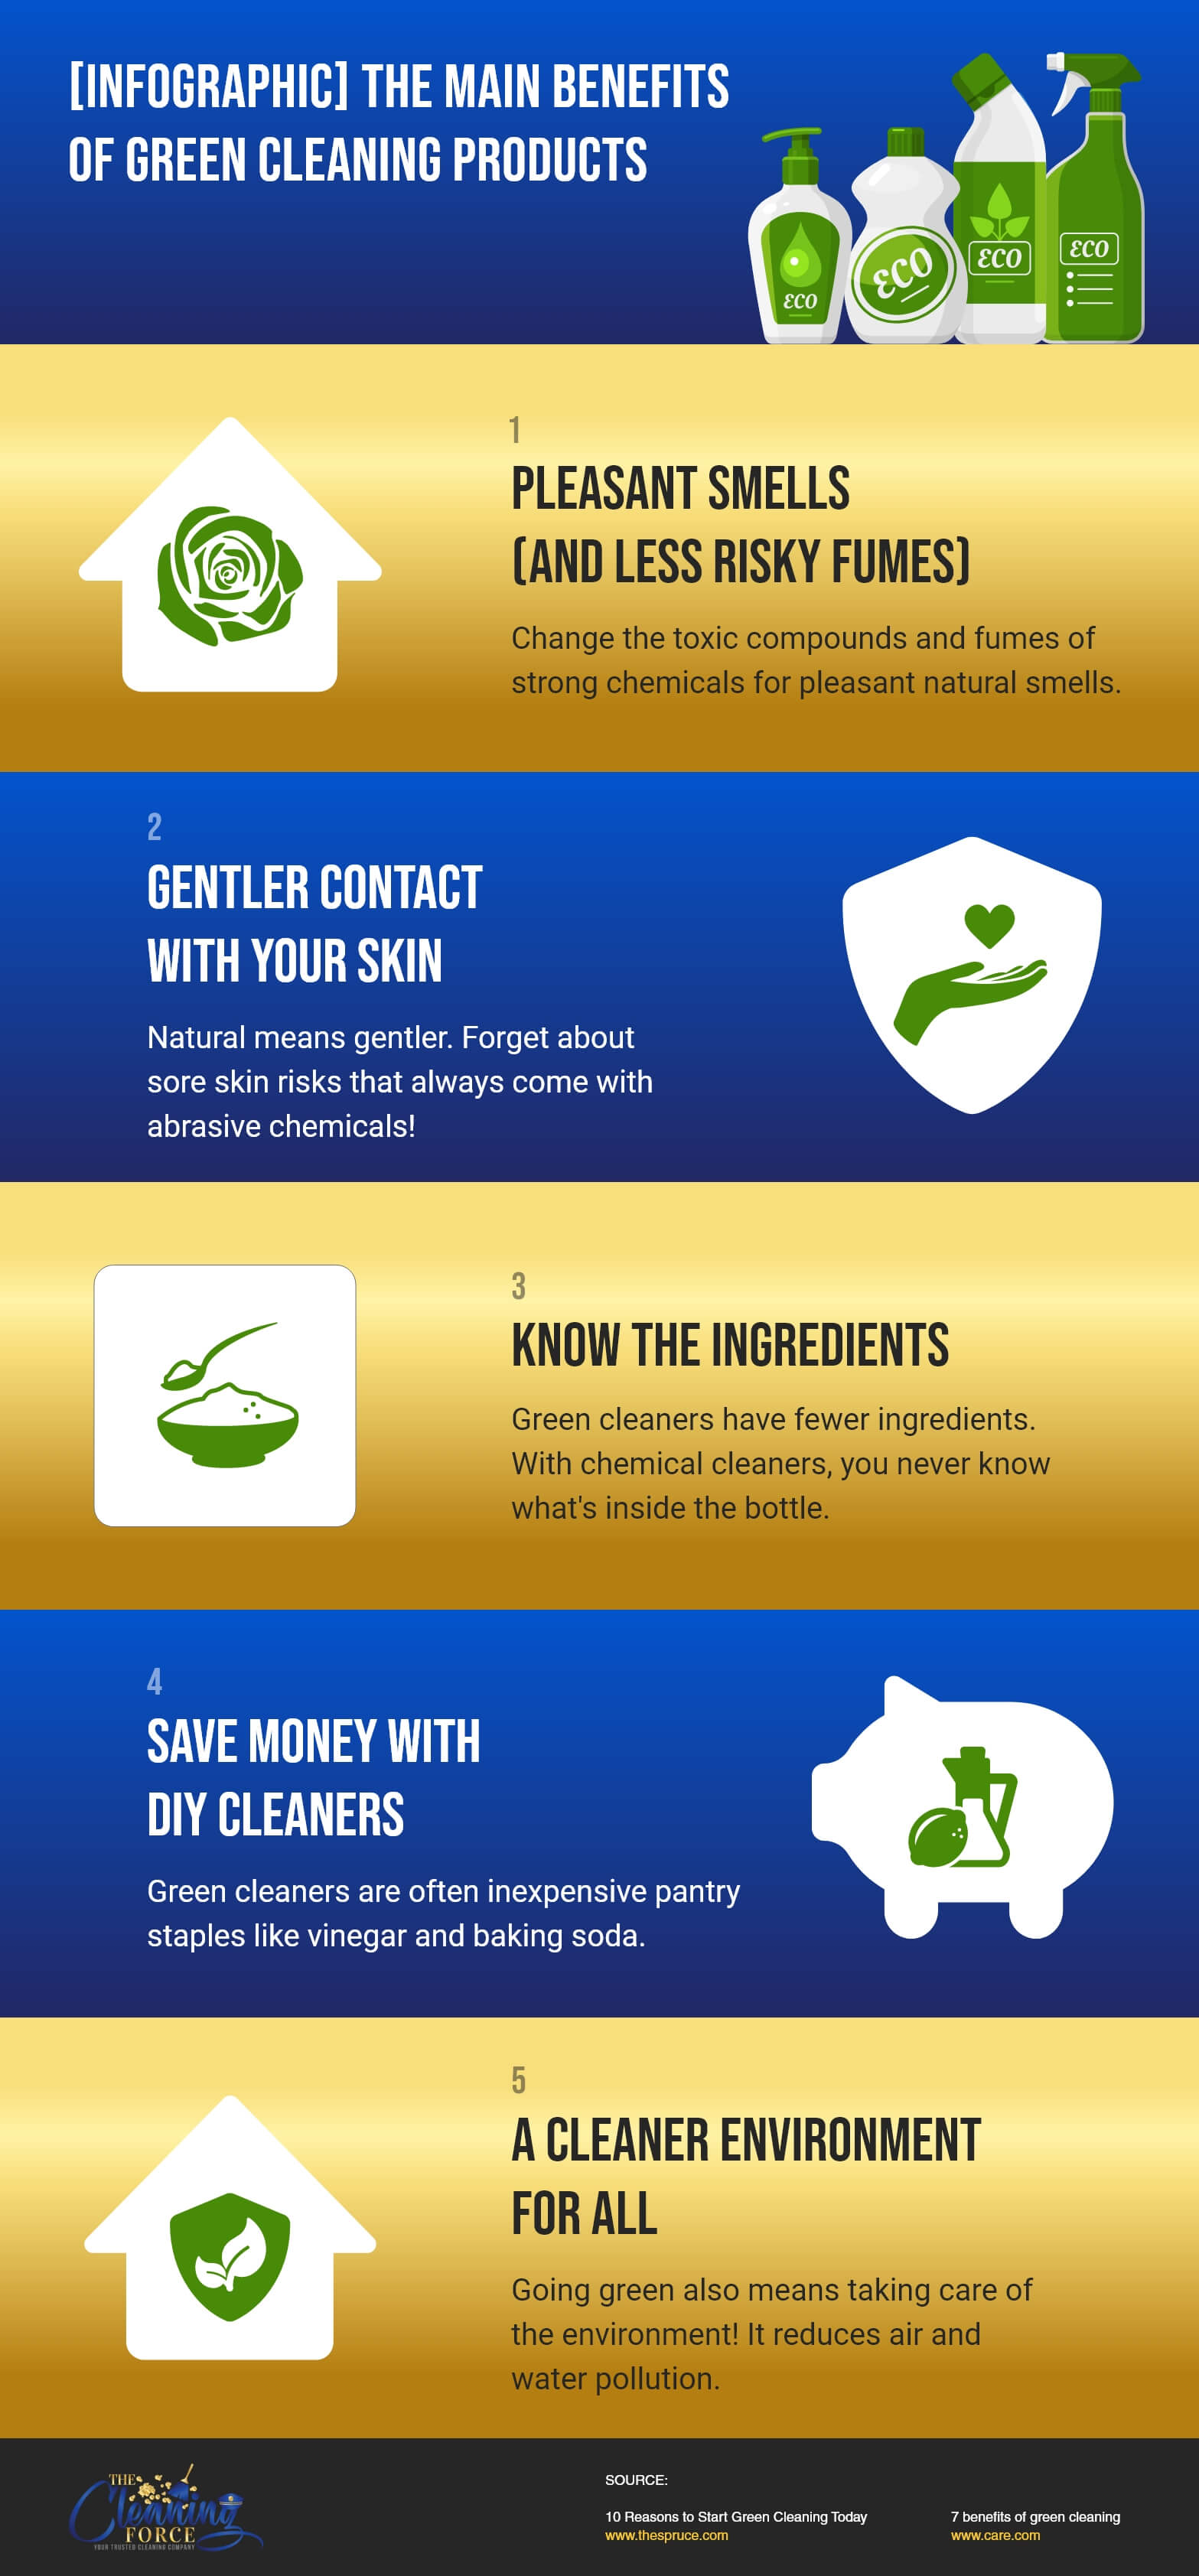 https://cleaningforcecompany.com/wp-content/uploads/2021/08/The-Cleaning-Force-Infographic-The-Main-Benefits-Of-Green-Cleaning-Products.jpg